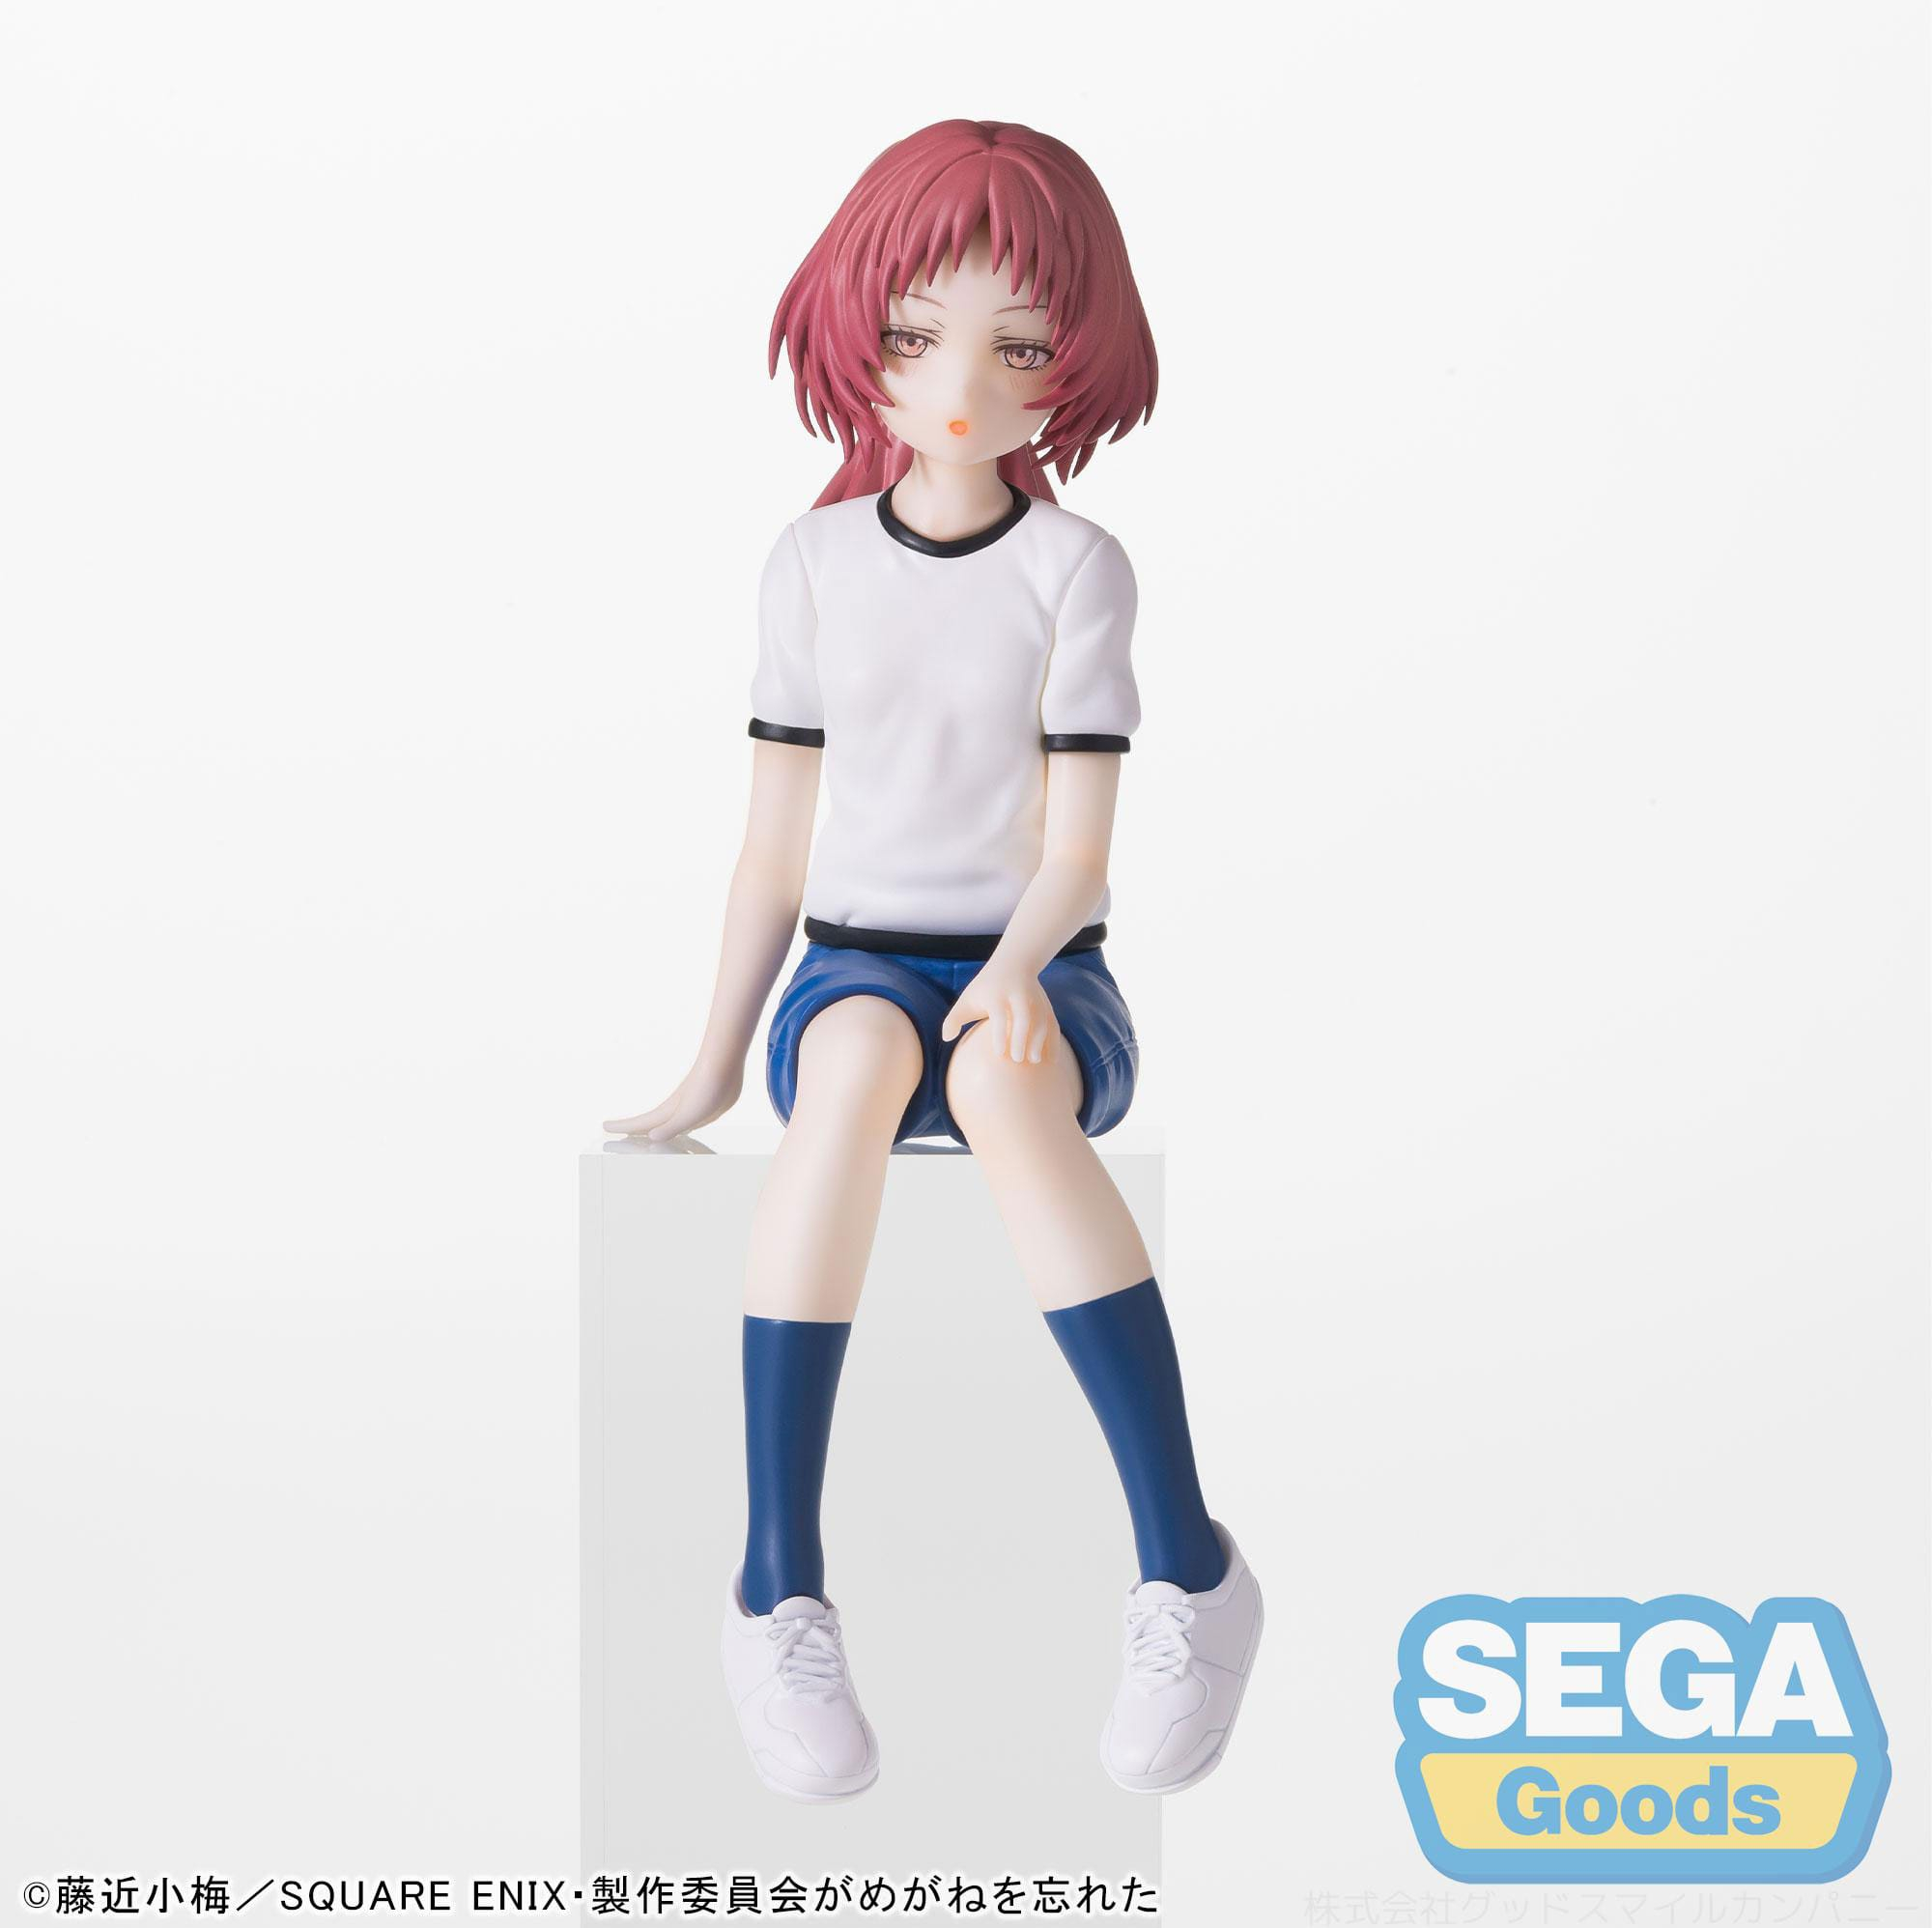 PREORDER - The Girl I Like Forgot Her Glasses - PM Perching - Ai Mie - 14cm PVC Statue